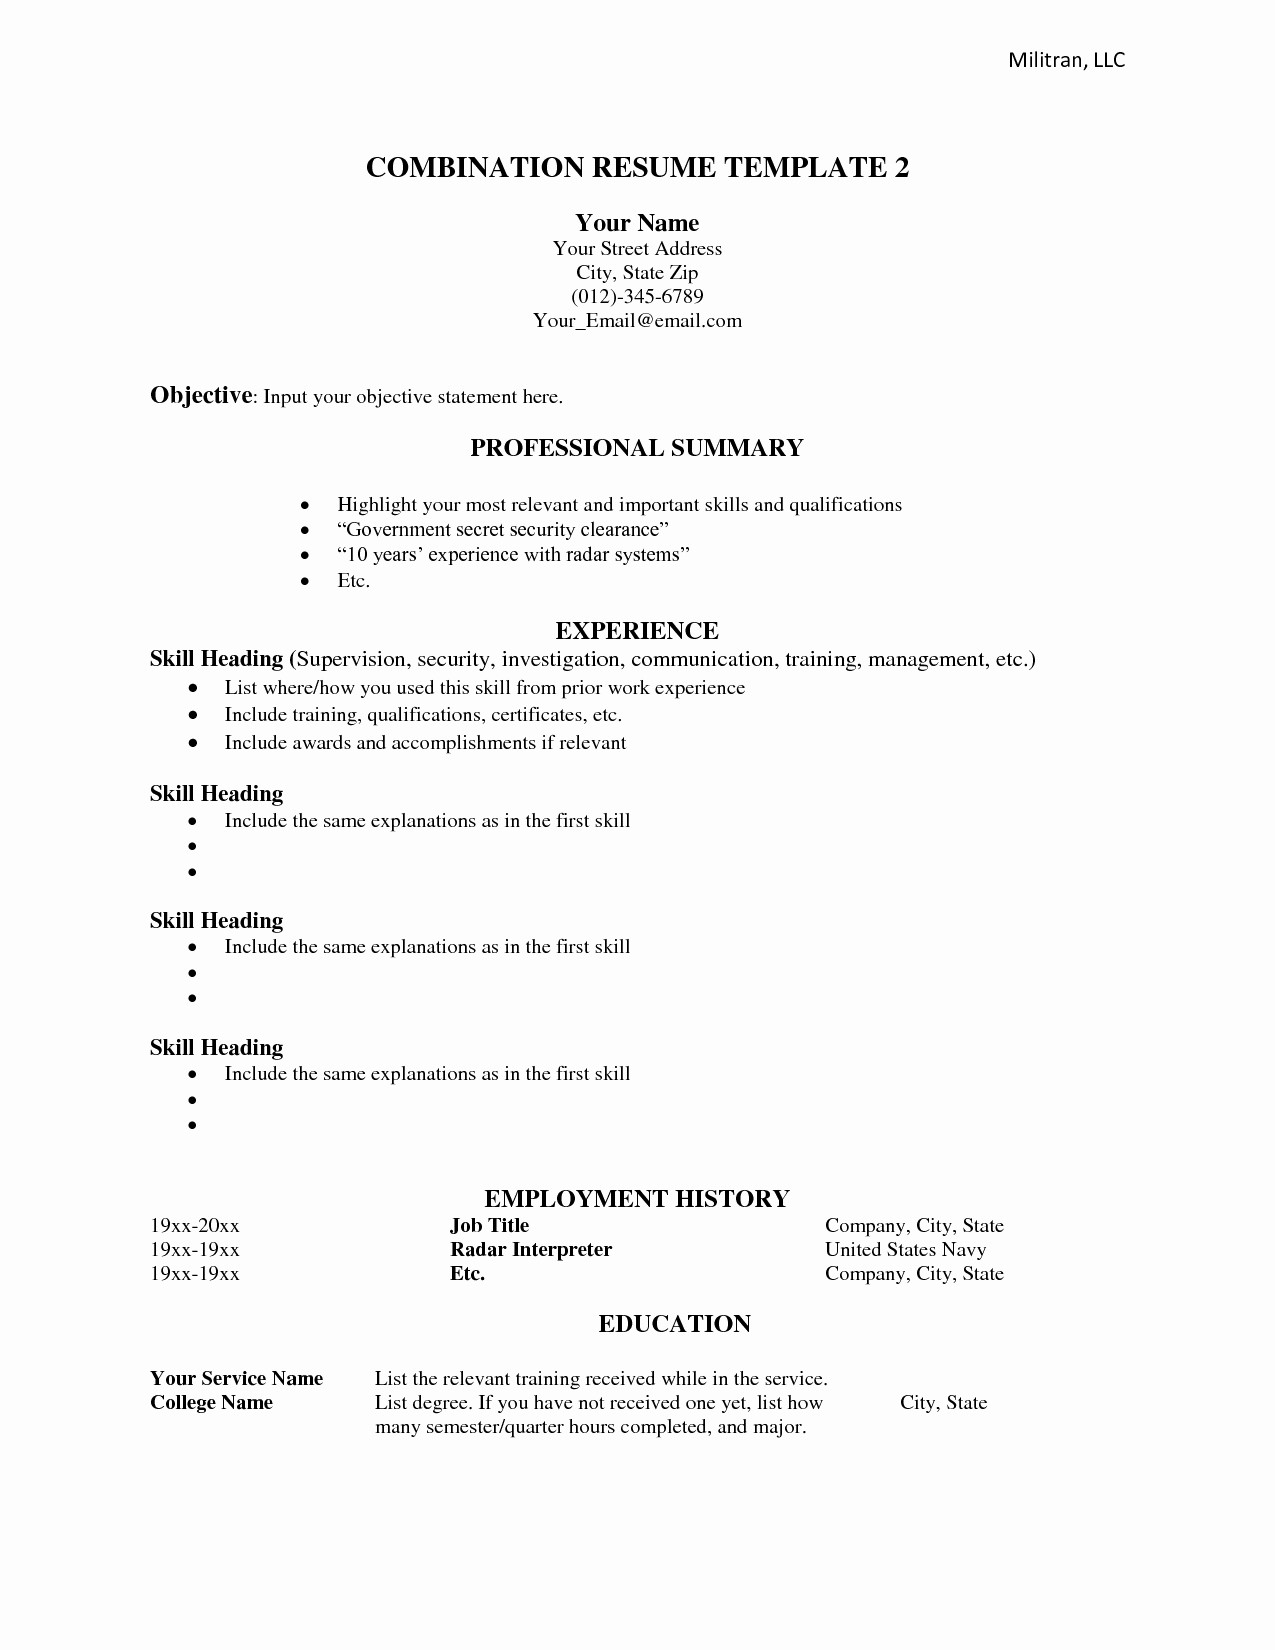 Combined Resume and Cover Letter Beautiful Bination Resume Template Word Beautiful Free Federal